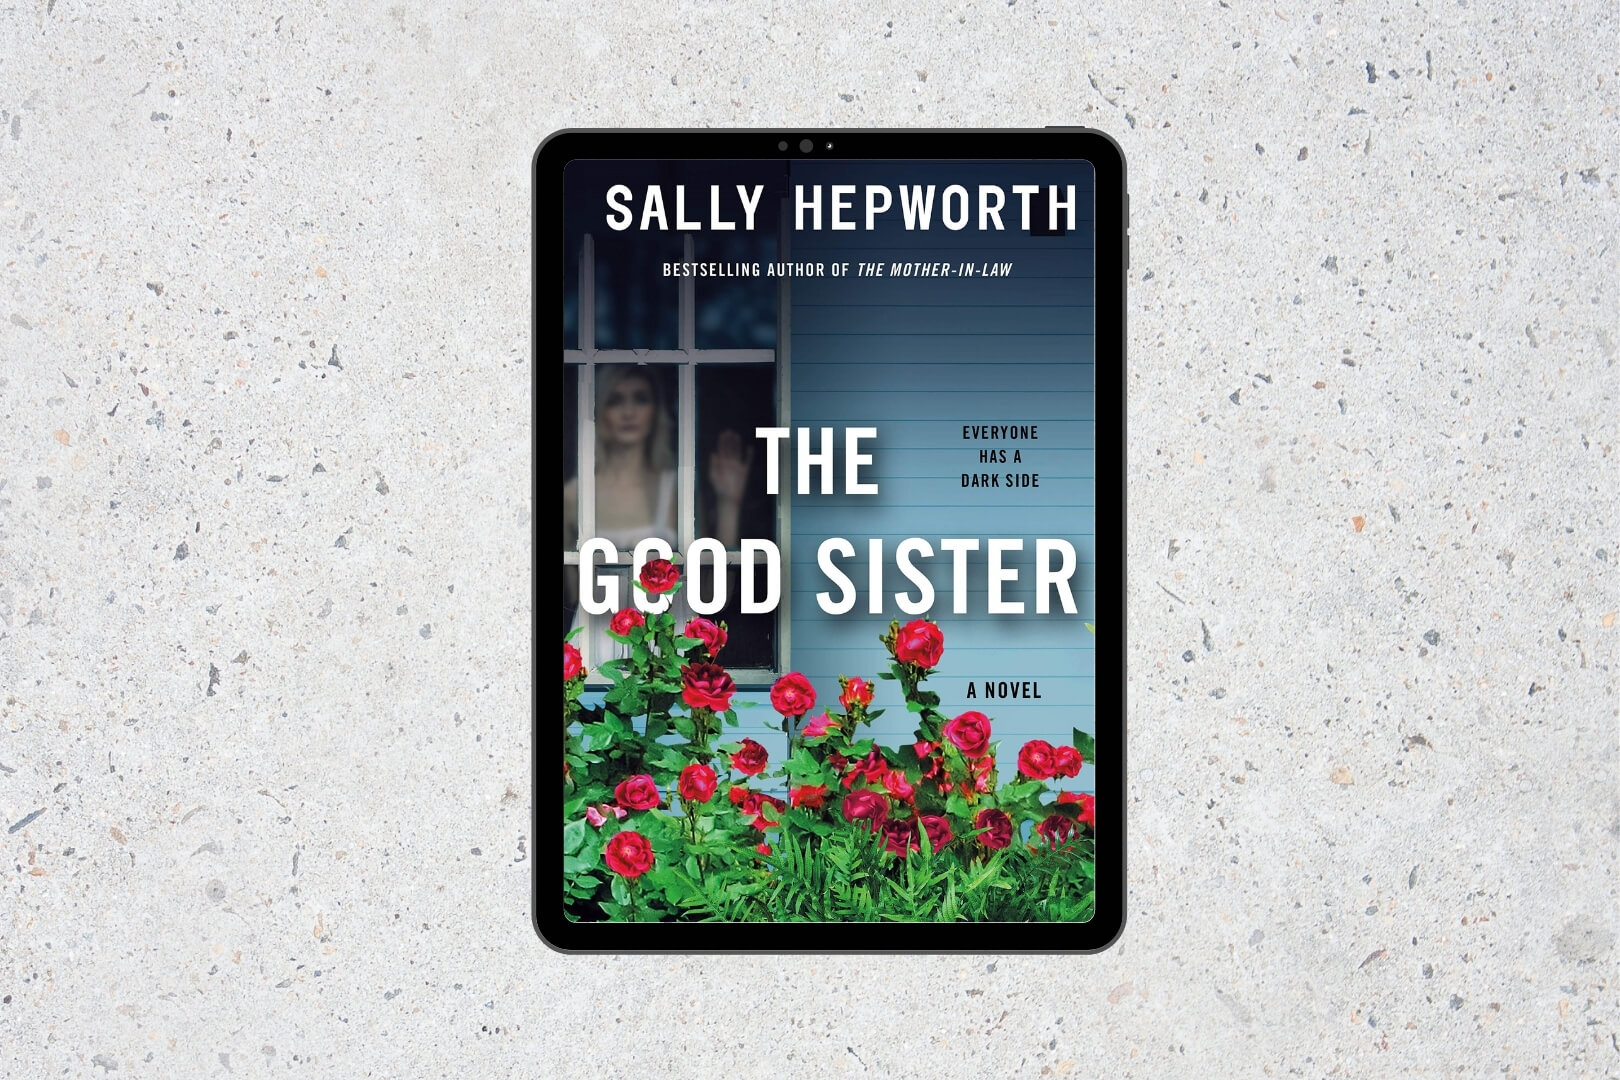 Book Club Questions for The Good Sister by Sally Hepworth